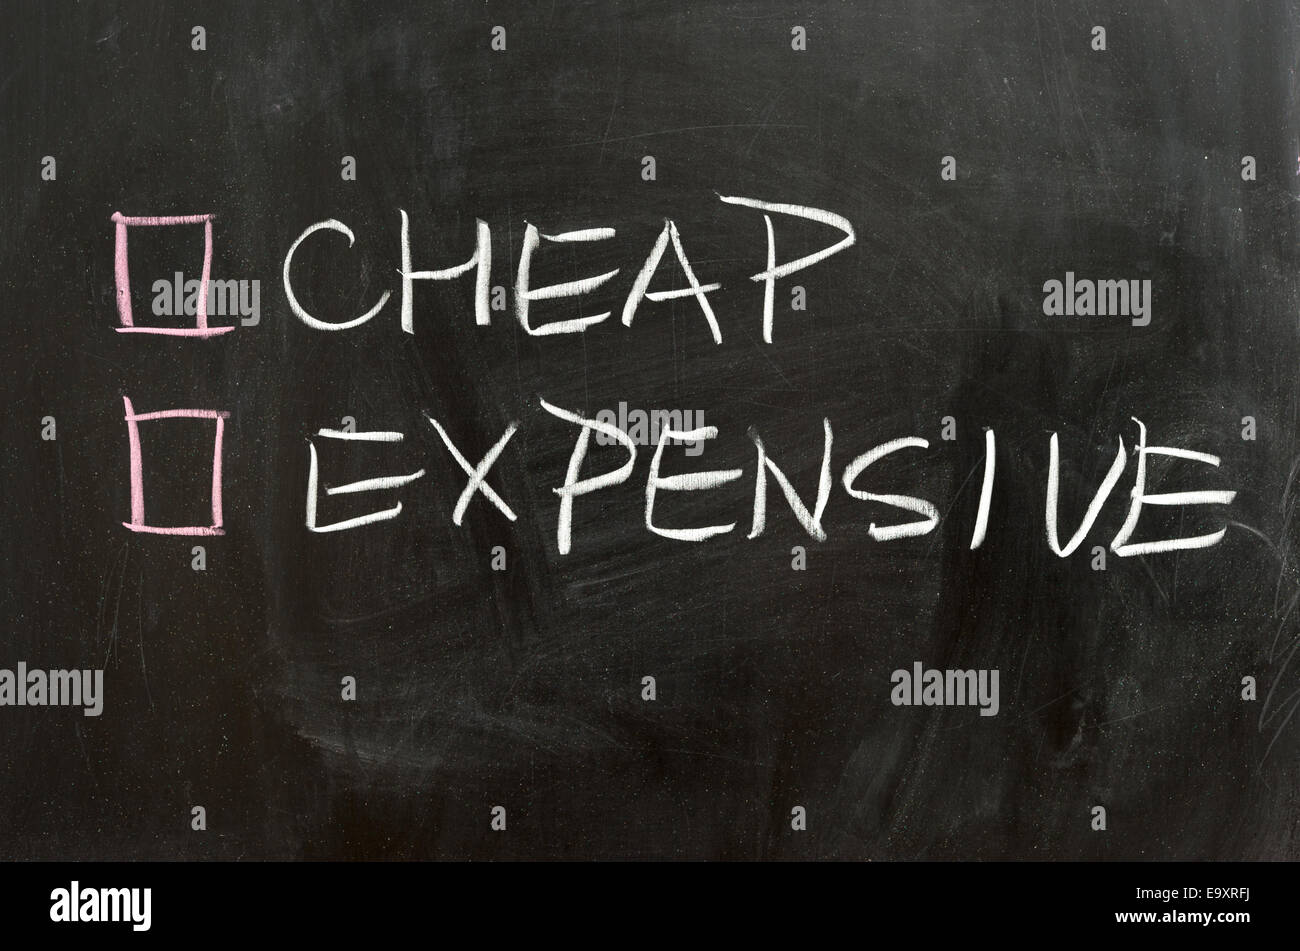 Cheap or expensive options on the chalkboard Stock Photo